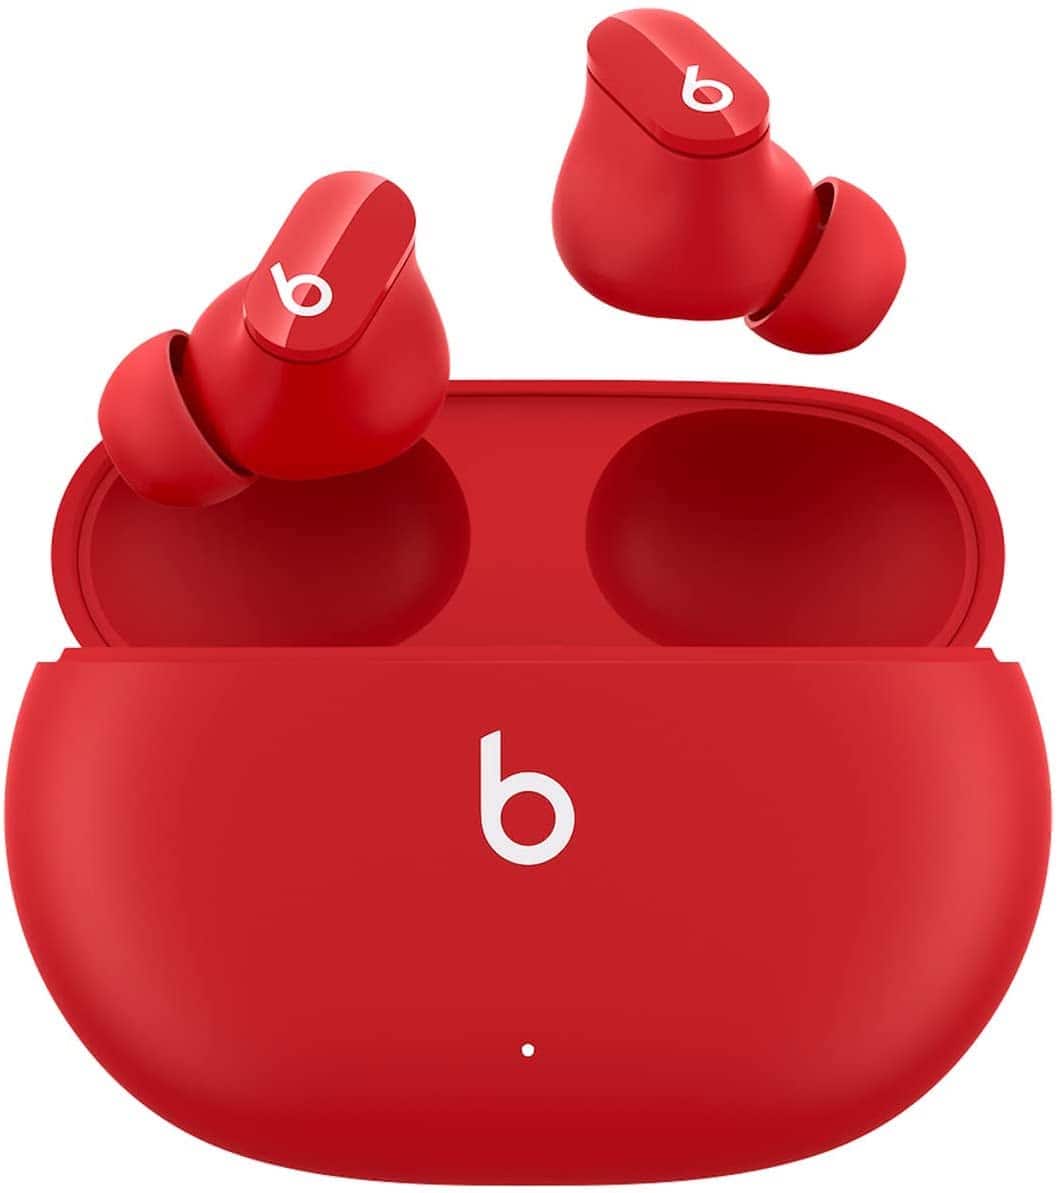 Beats Studio Buds are an outstanding value at a low current price of $99.